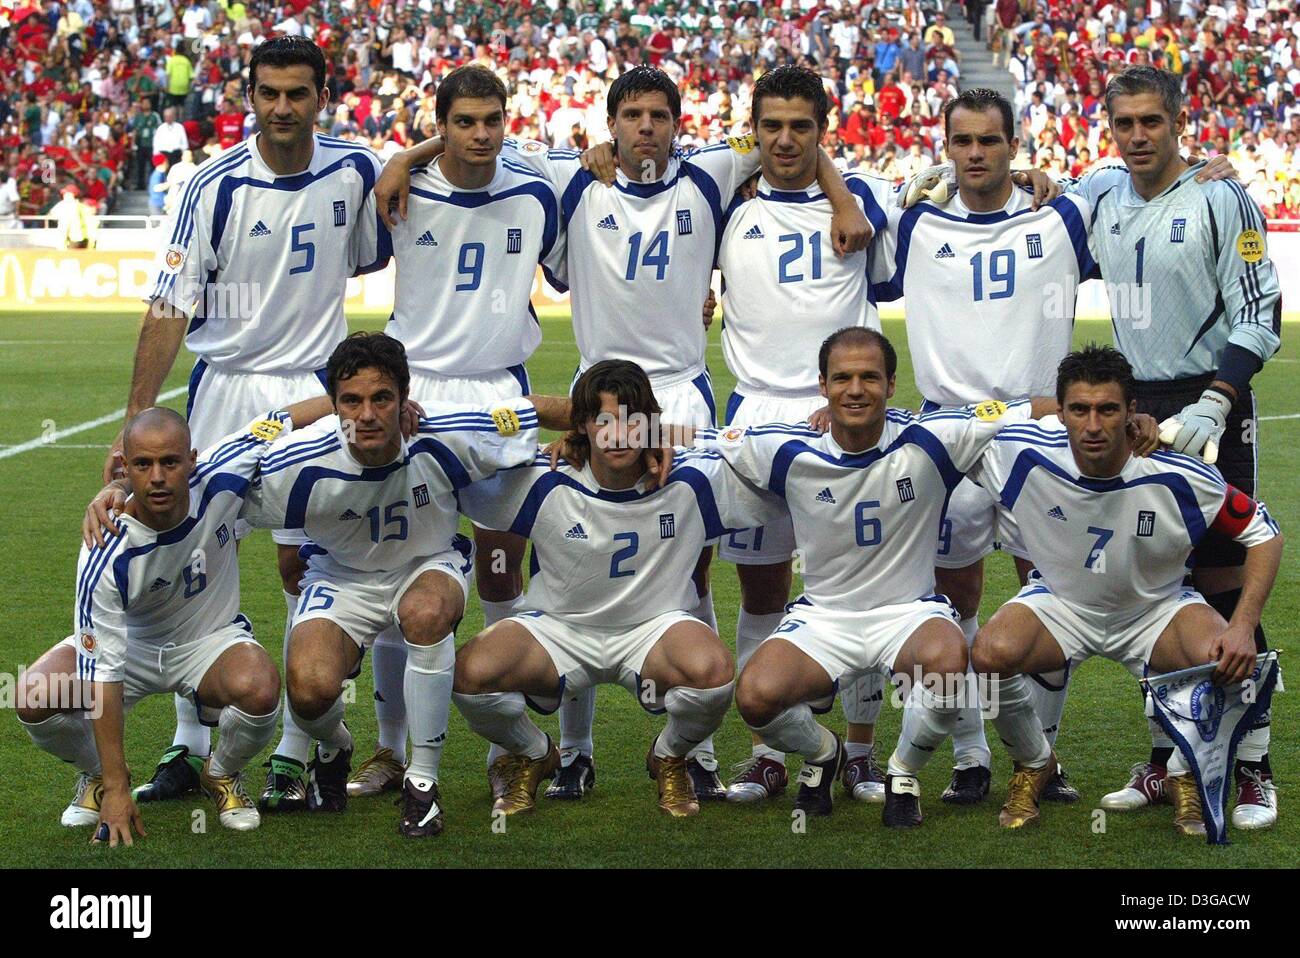 (dpa) - The Greece team starting eleven pose for a group photo prior to the Euro 2004 final between Portugal and Greece at Luz stadium in Lisbon, Portugal, 4 July 2004. Standing (from L:) Traianos Dellas, Angelos Charisteas, Panagiotis Fyssas, Konstantinos Katsouranis, Mihalis Kapsis, Antonios Nikopolidis. Bottom (from L:) Stylianos Giannakopoulos, Zisis Vryzas, Georgios Seitaridis Stock Photo